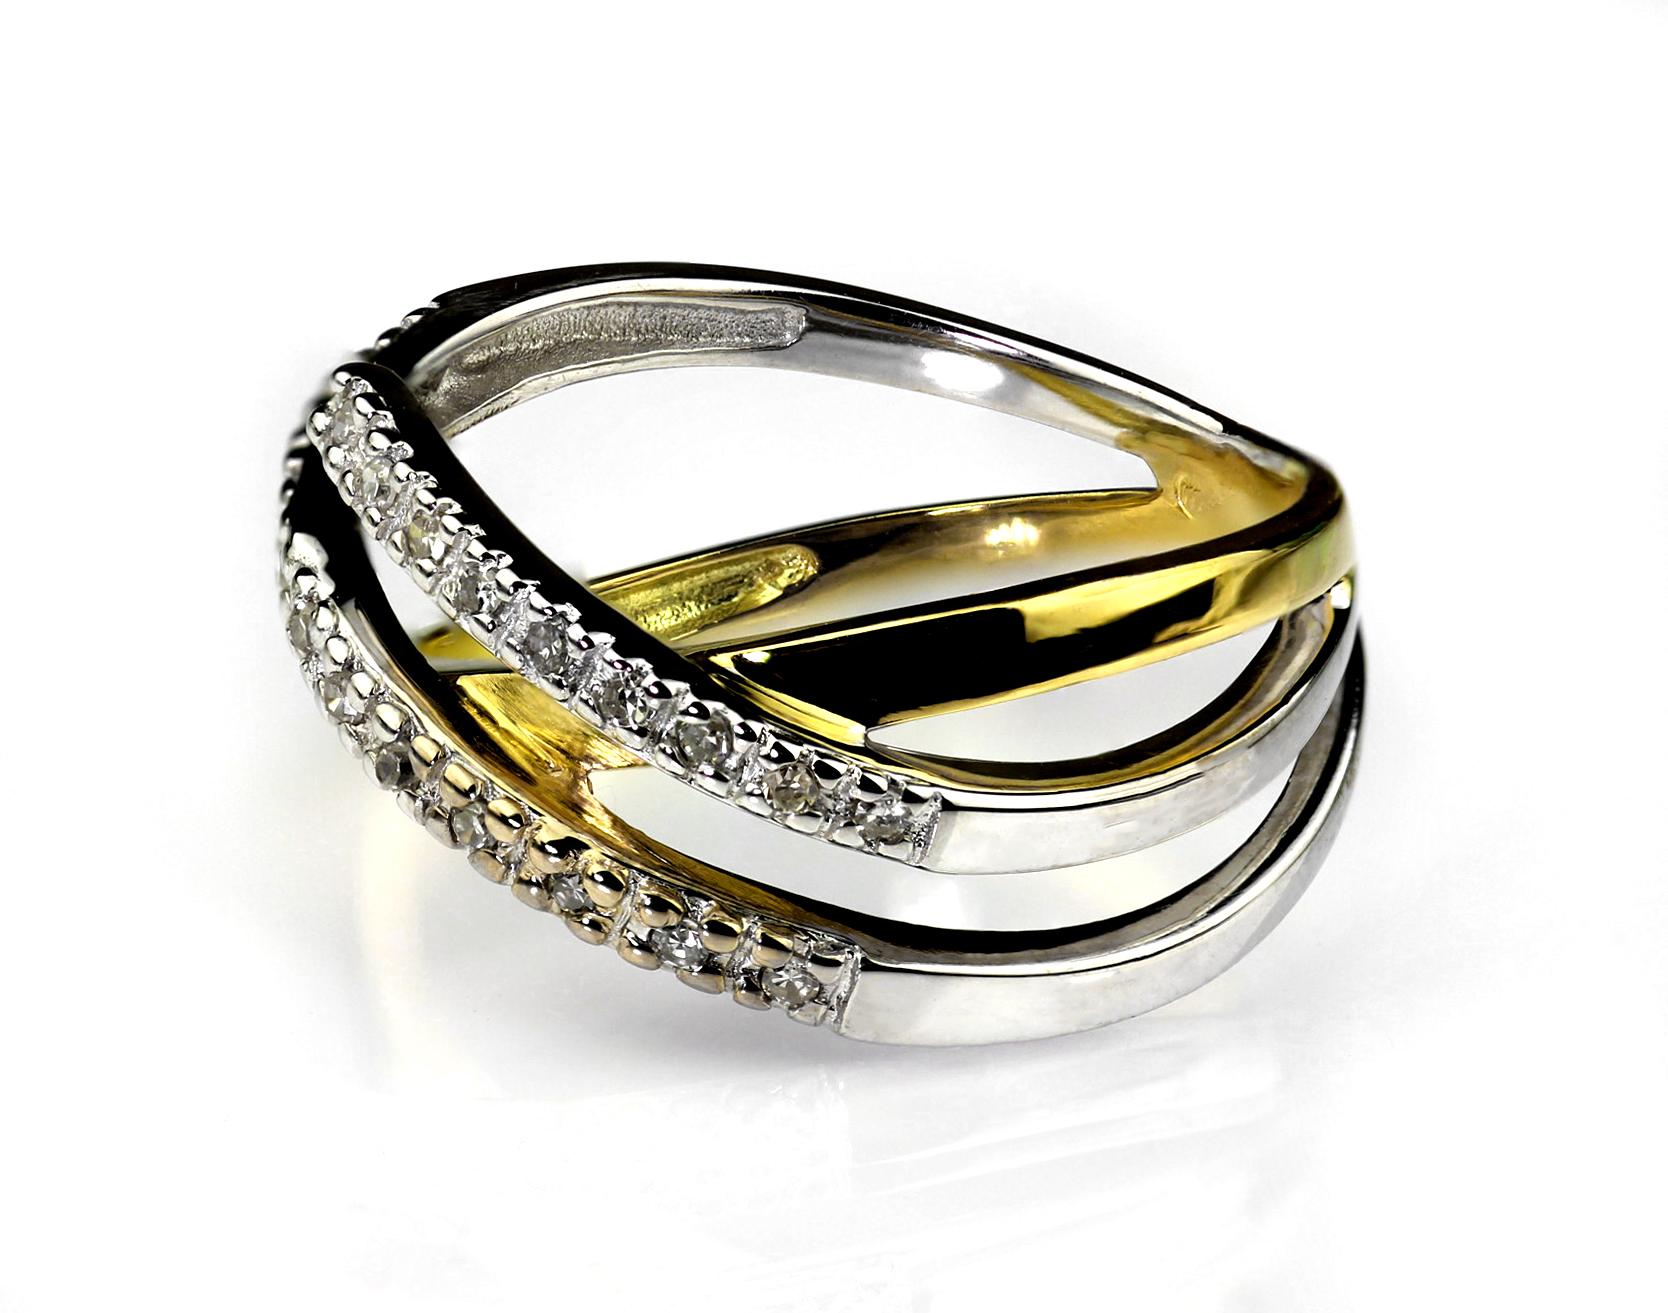 abstract ring designs